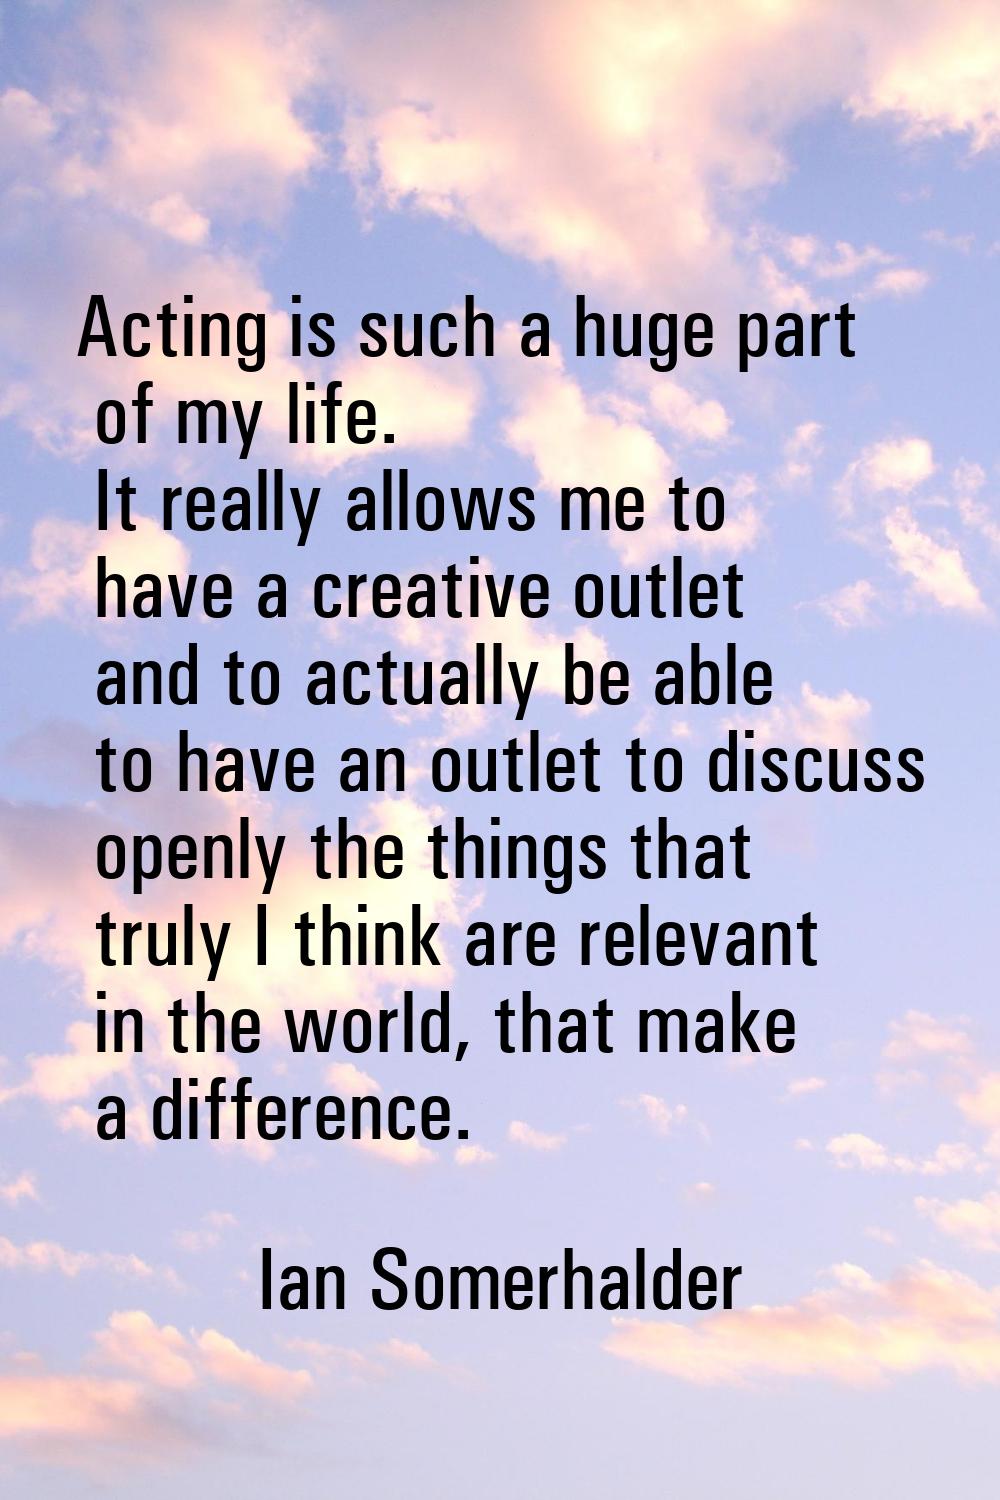 Acting is such a huge part of my life. It really allows me to have a creative outlet and to actuall